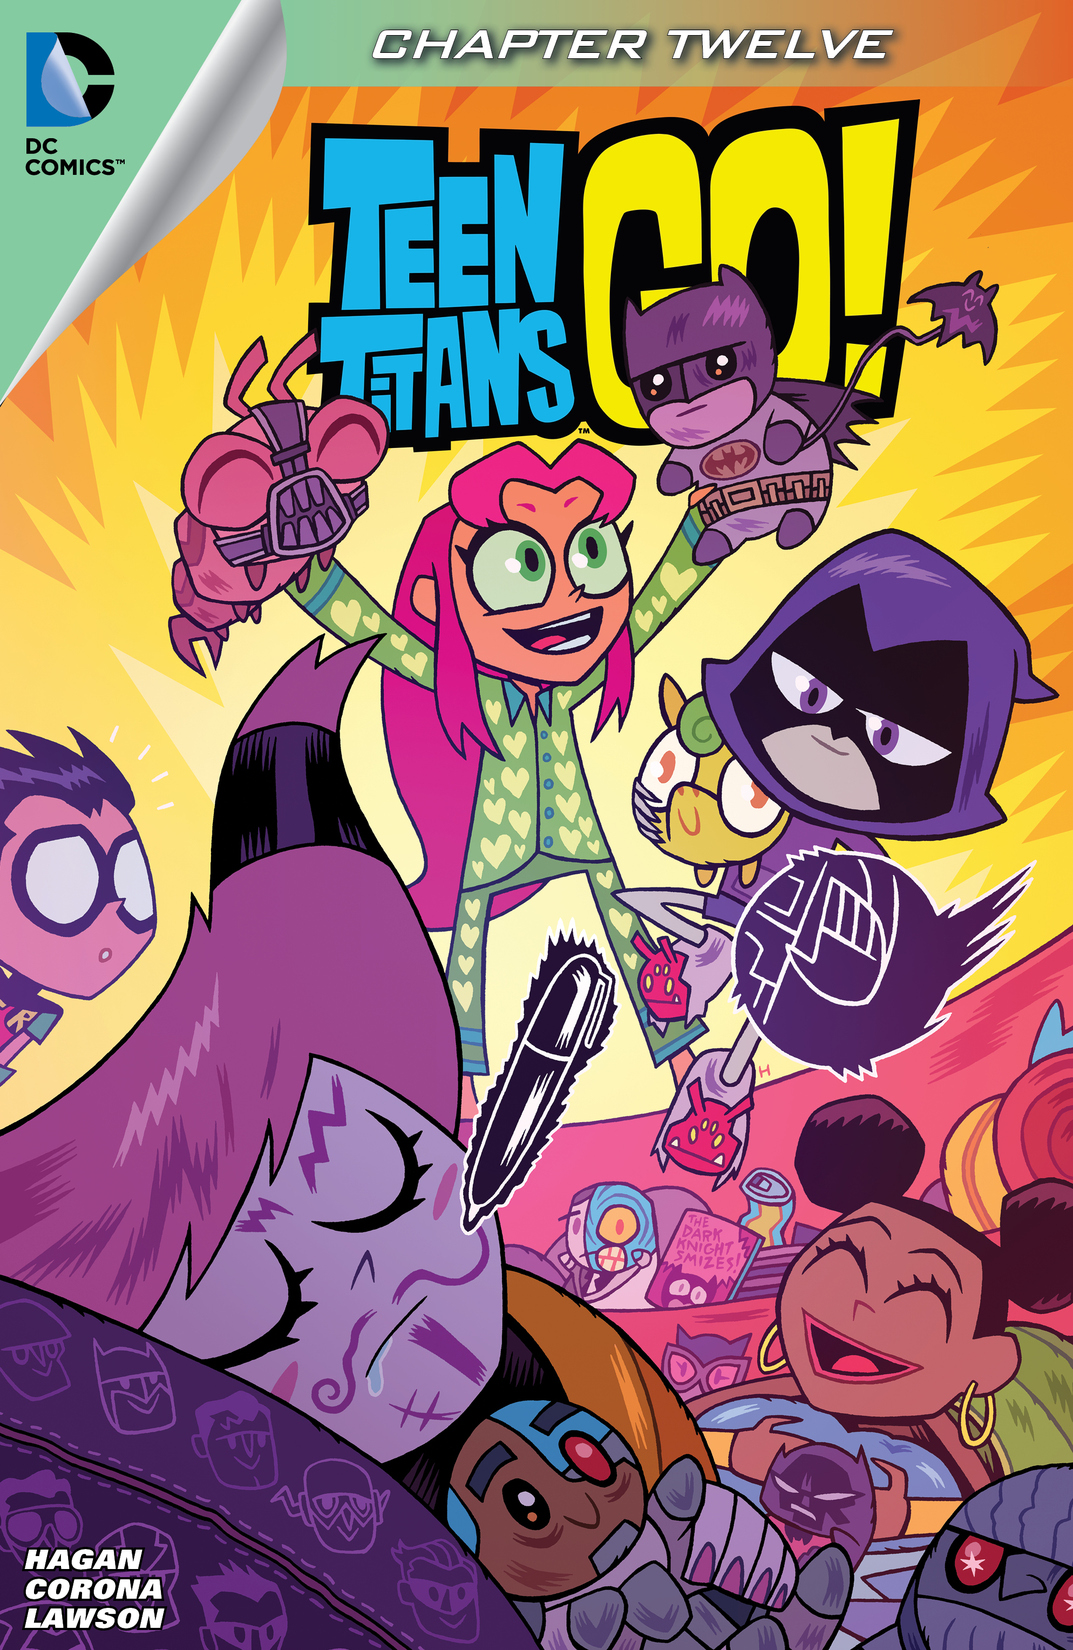 Teen Titans Go! (2013-) #12 preview images